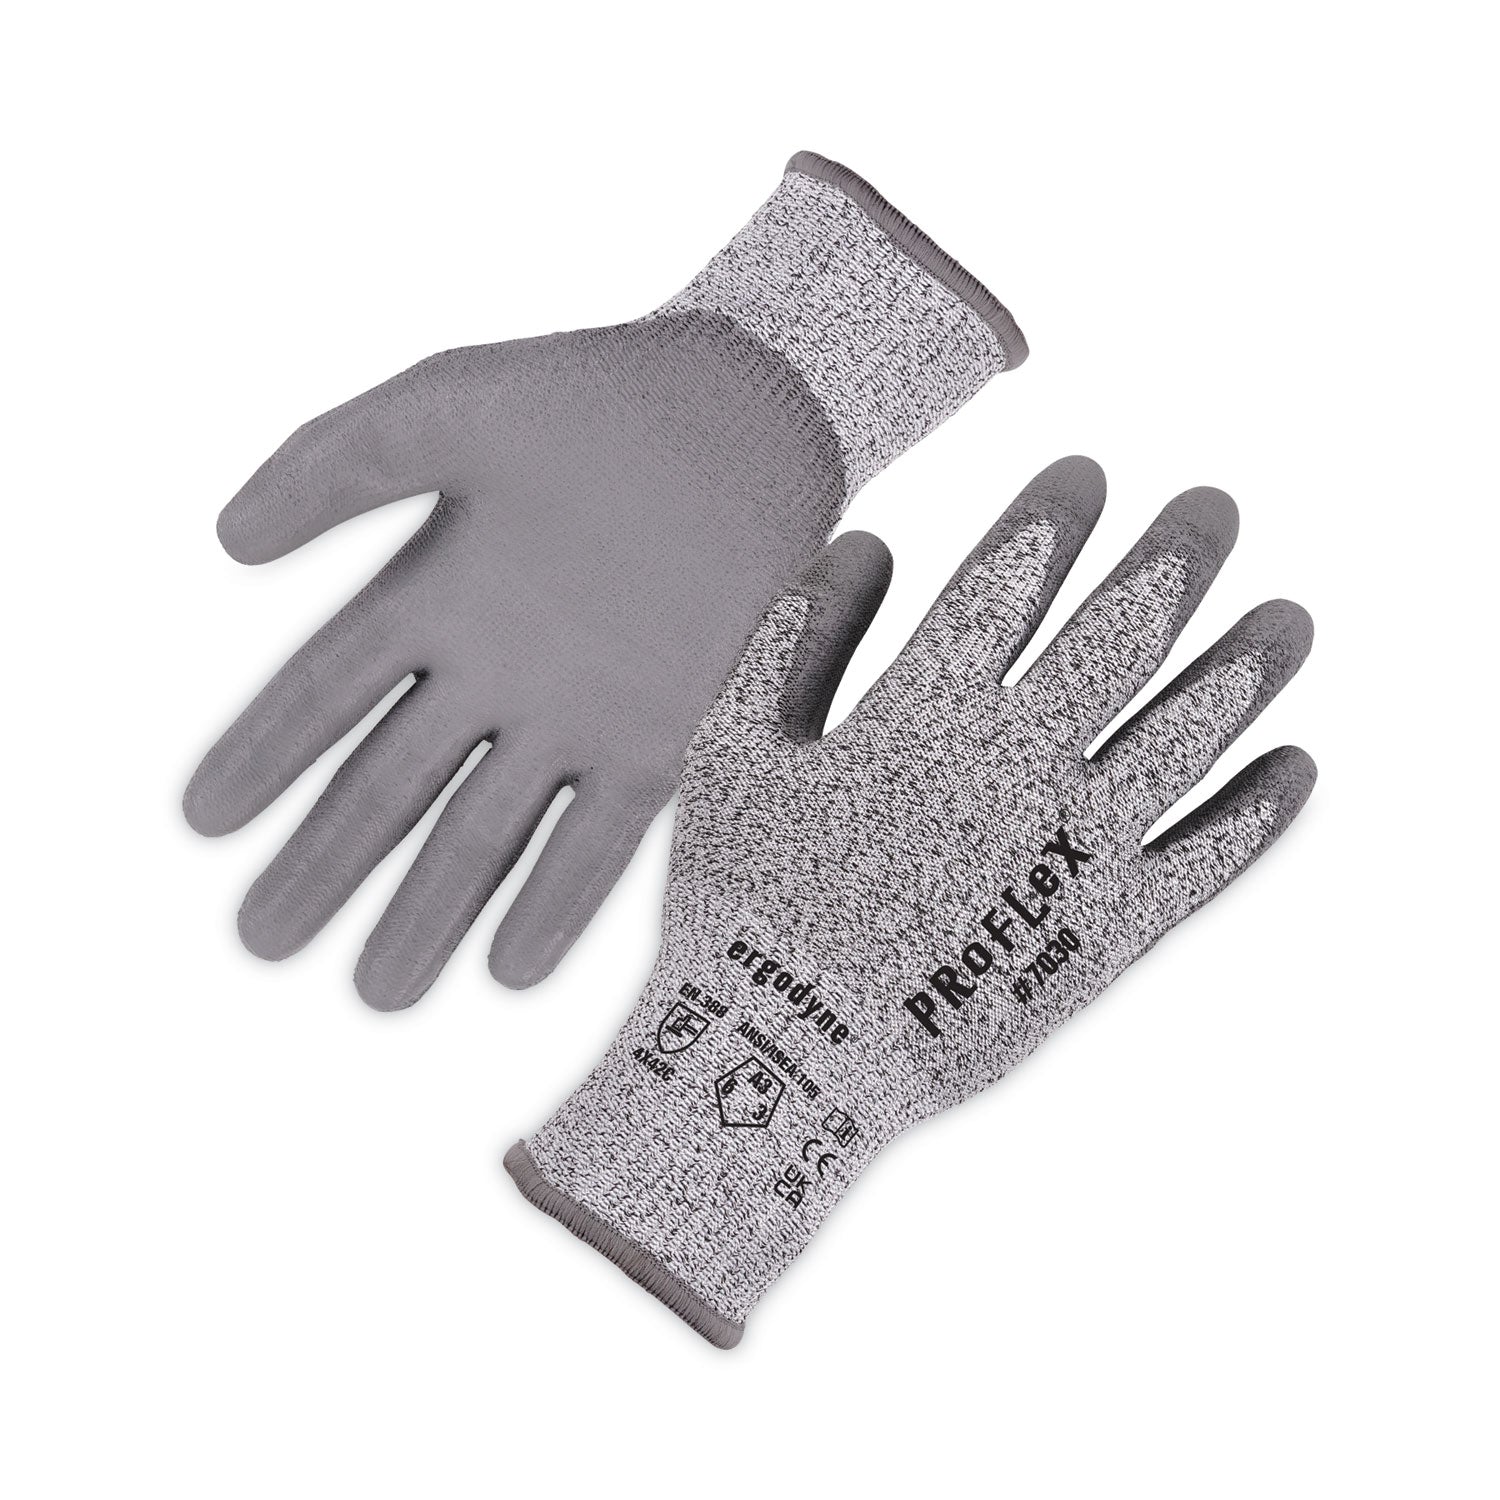 proflex-7030-ansi-a3-pu-coated-cr-gloves-gray-2x-large-pair-ships-in-1-3-business-days_ego10466 - 1